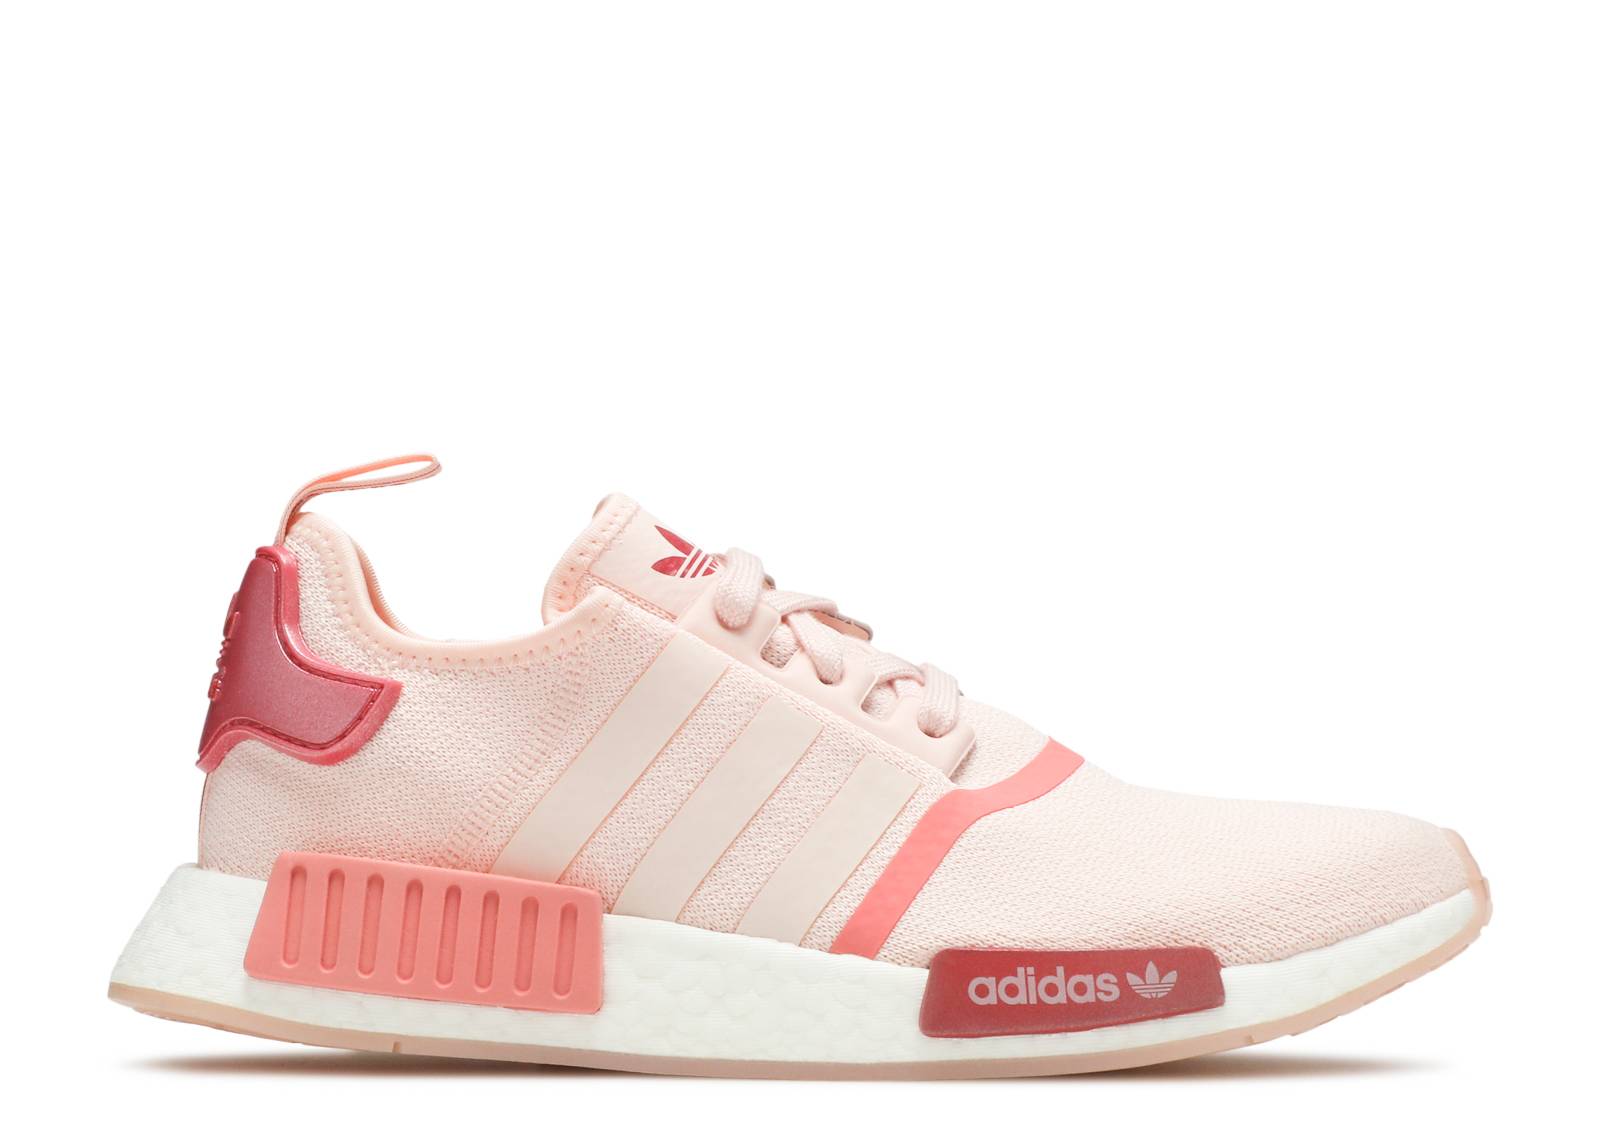 Wmns NMD_R1 'Icey Pink'